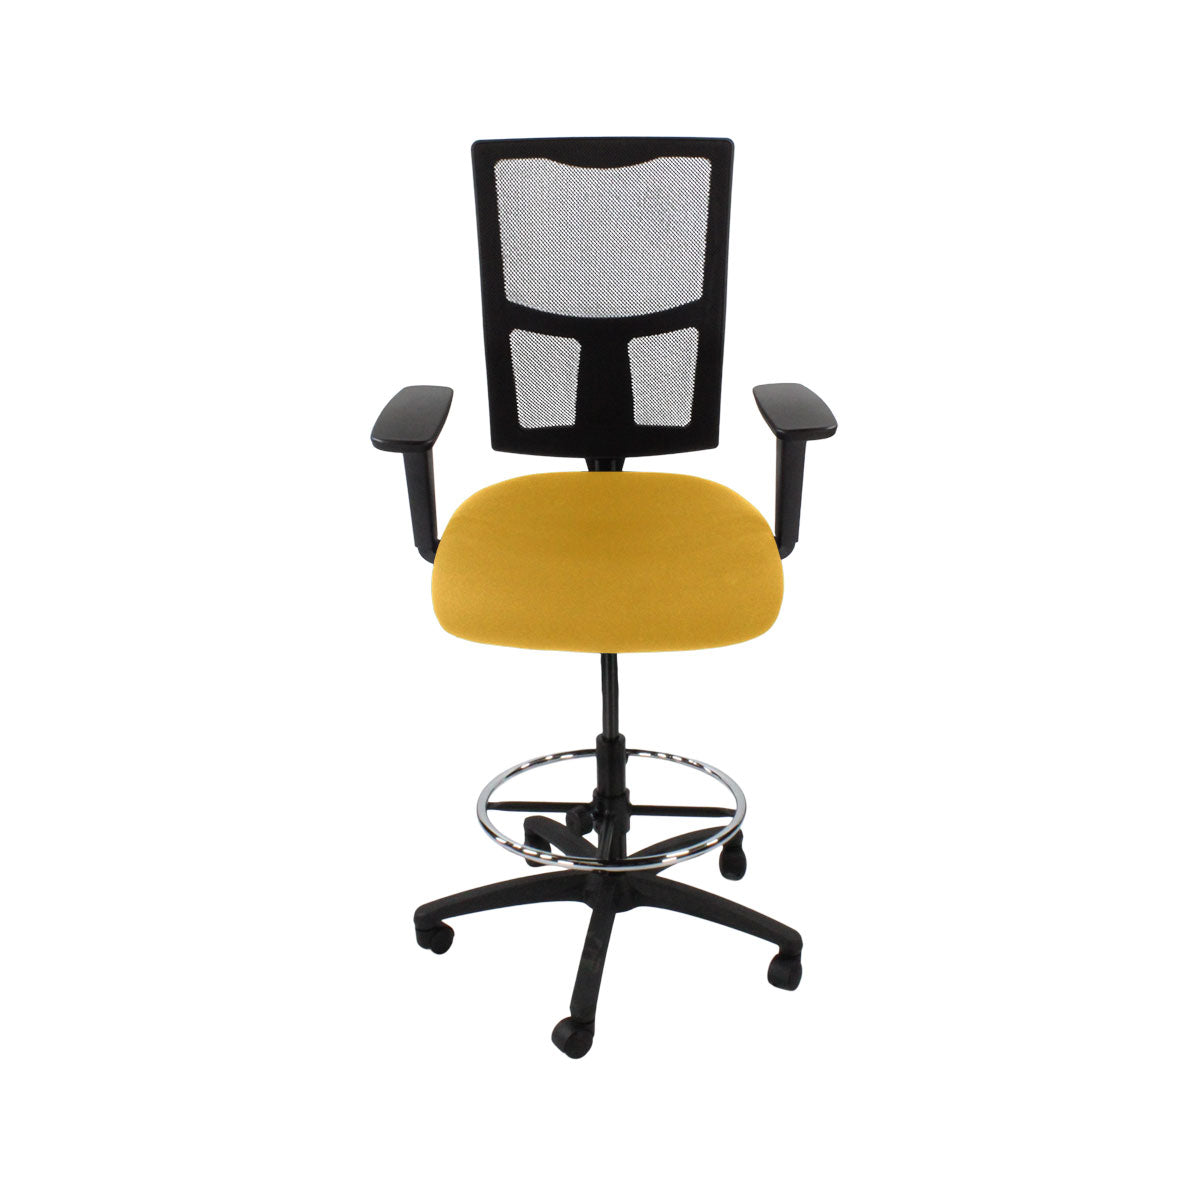 TOC: Ergo 2 Draughtsman Chair in Yellow Fabric - Refurbished